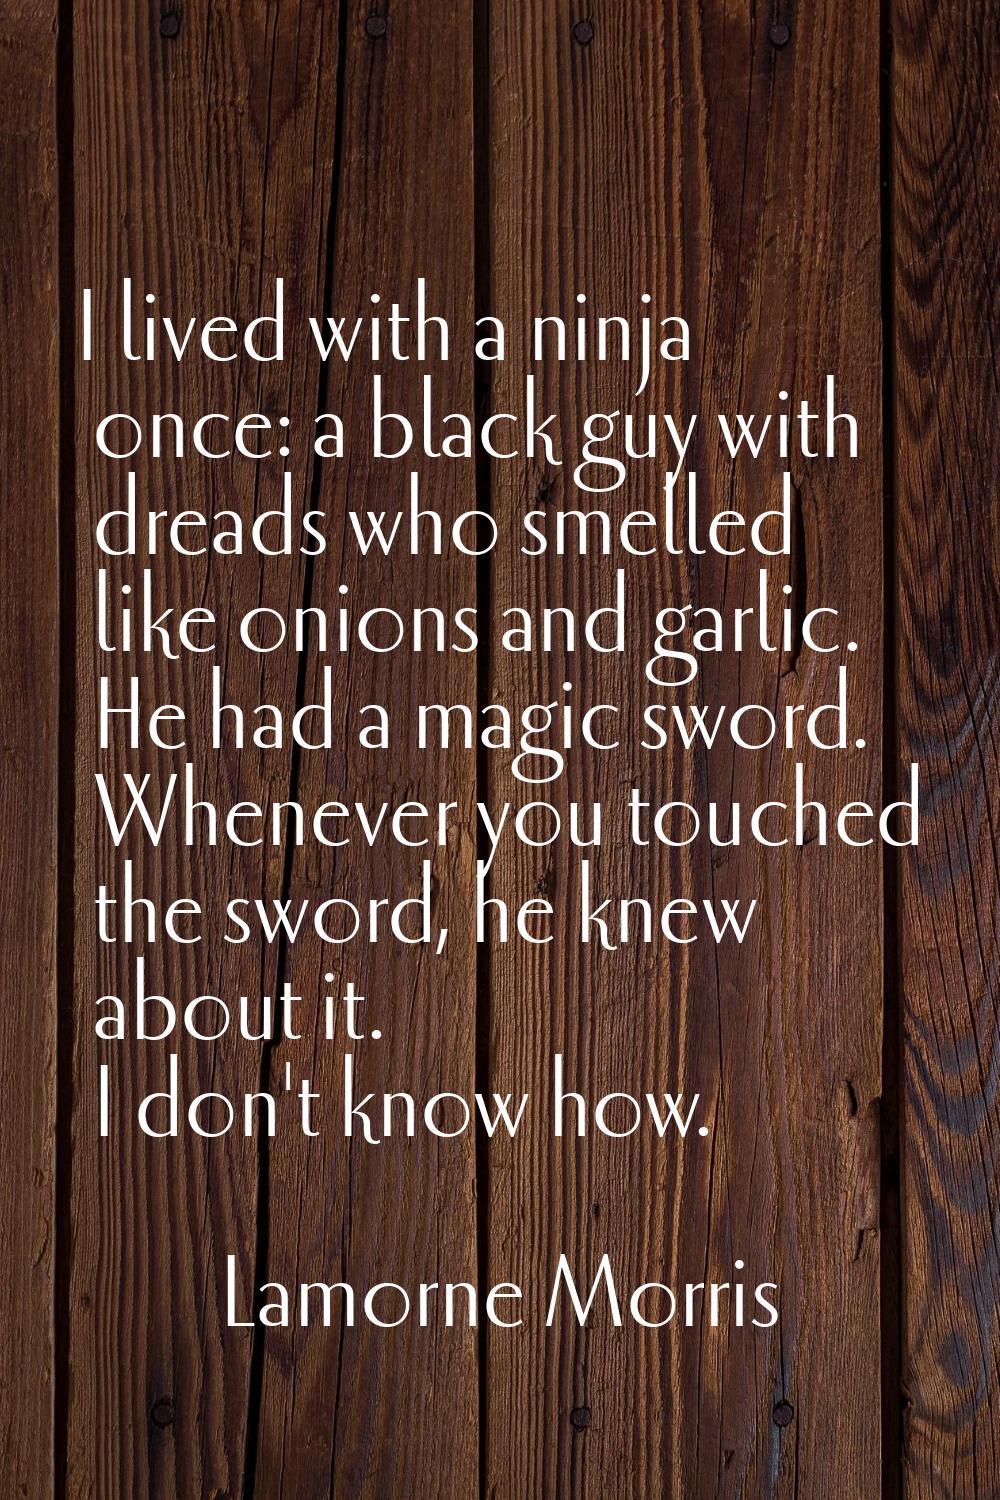 I lived with a ninja once: a black guy with dreads who smelled like onions and garlic. He had a mag